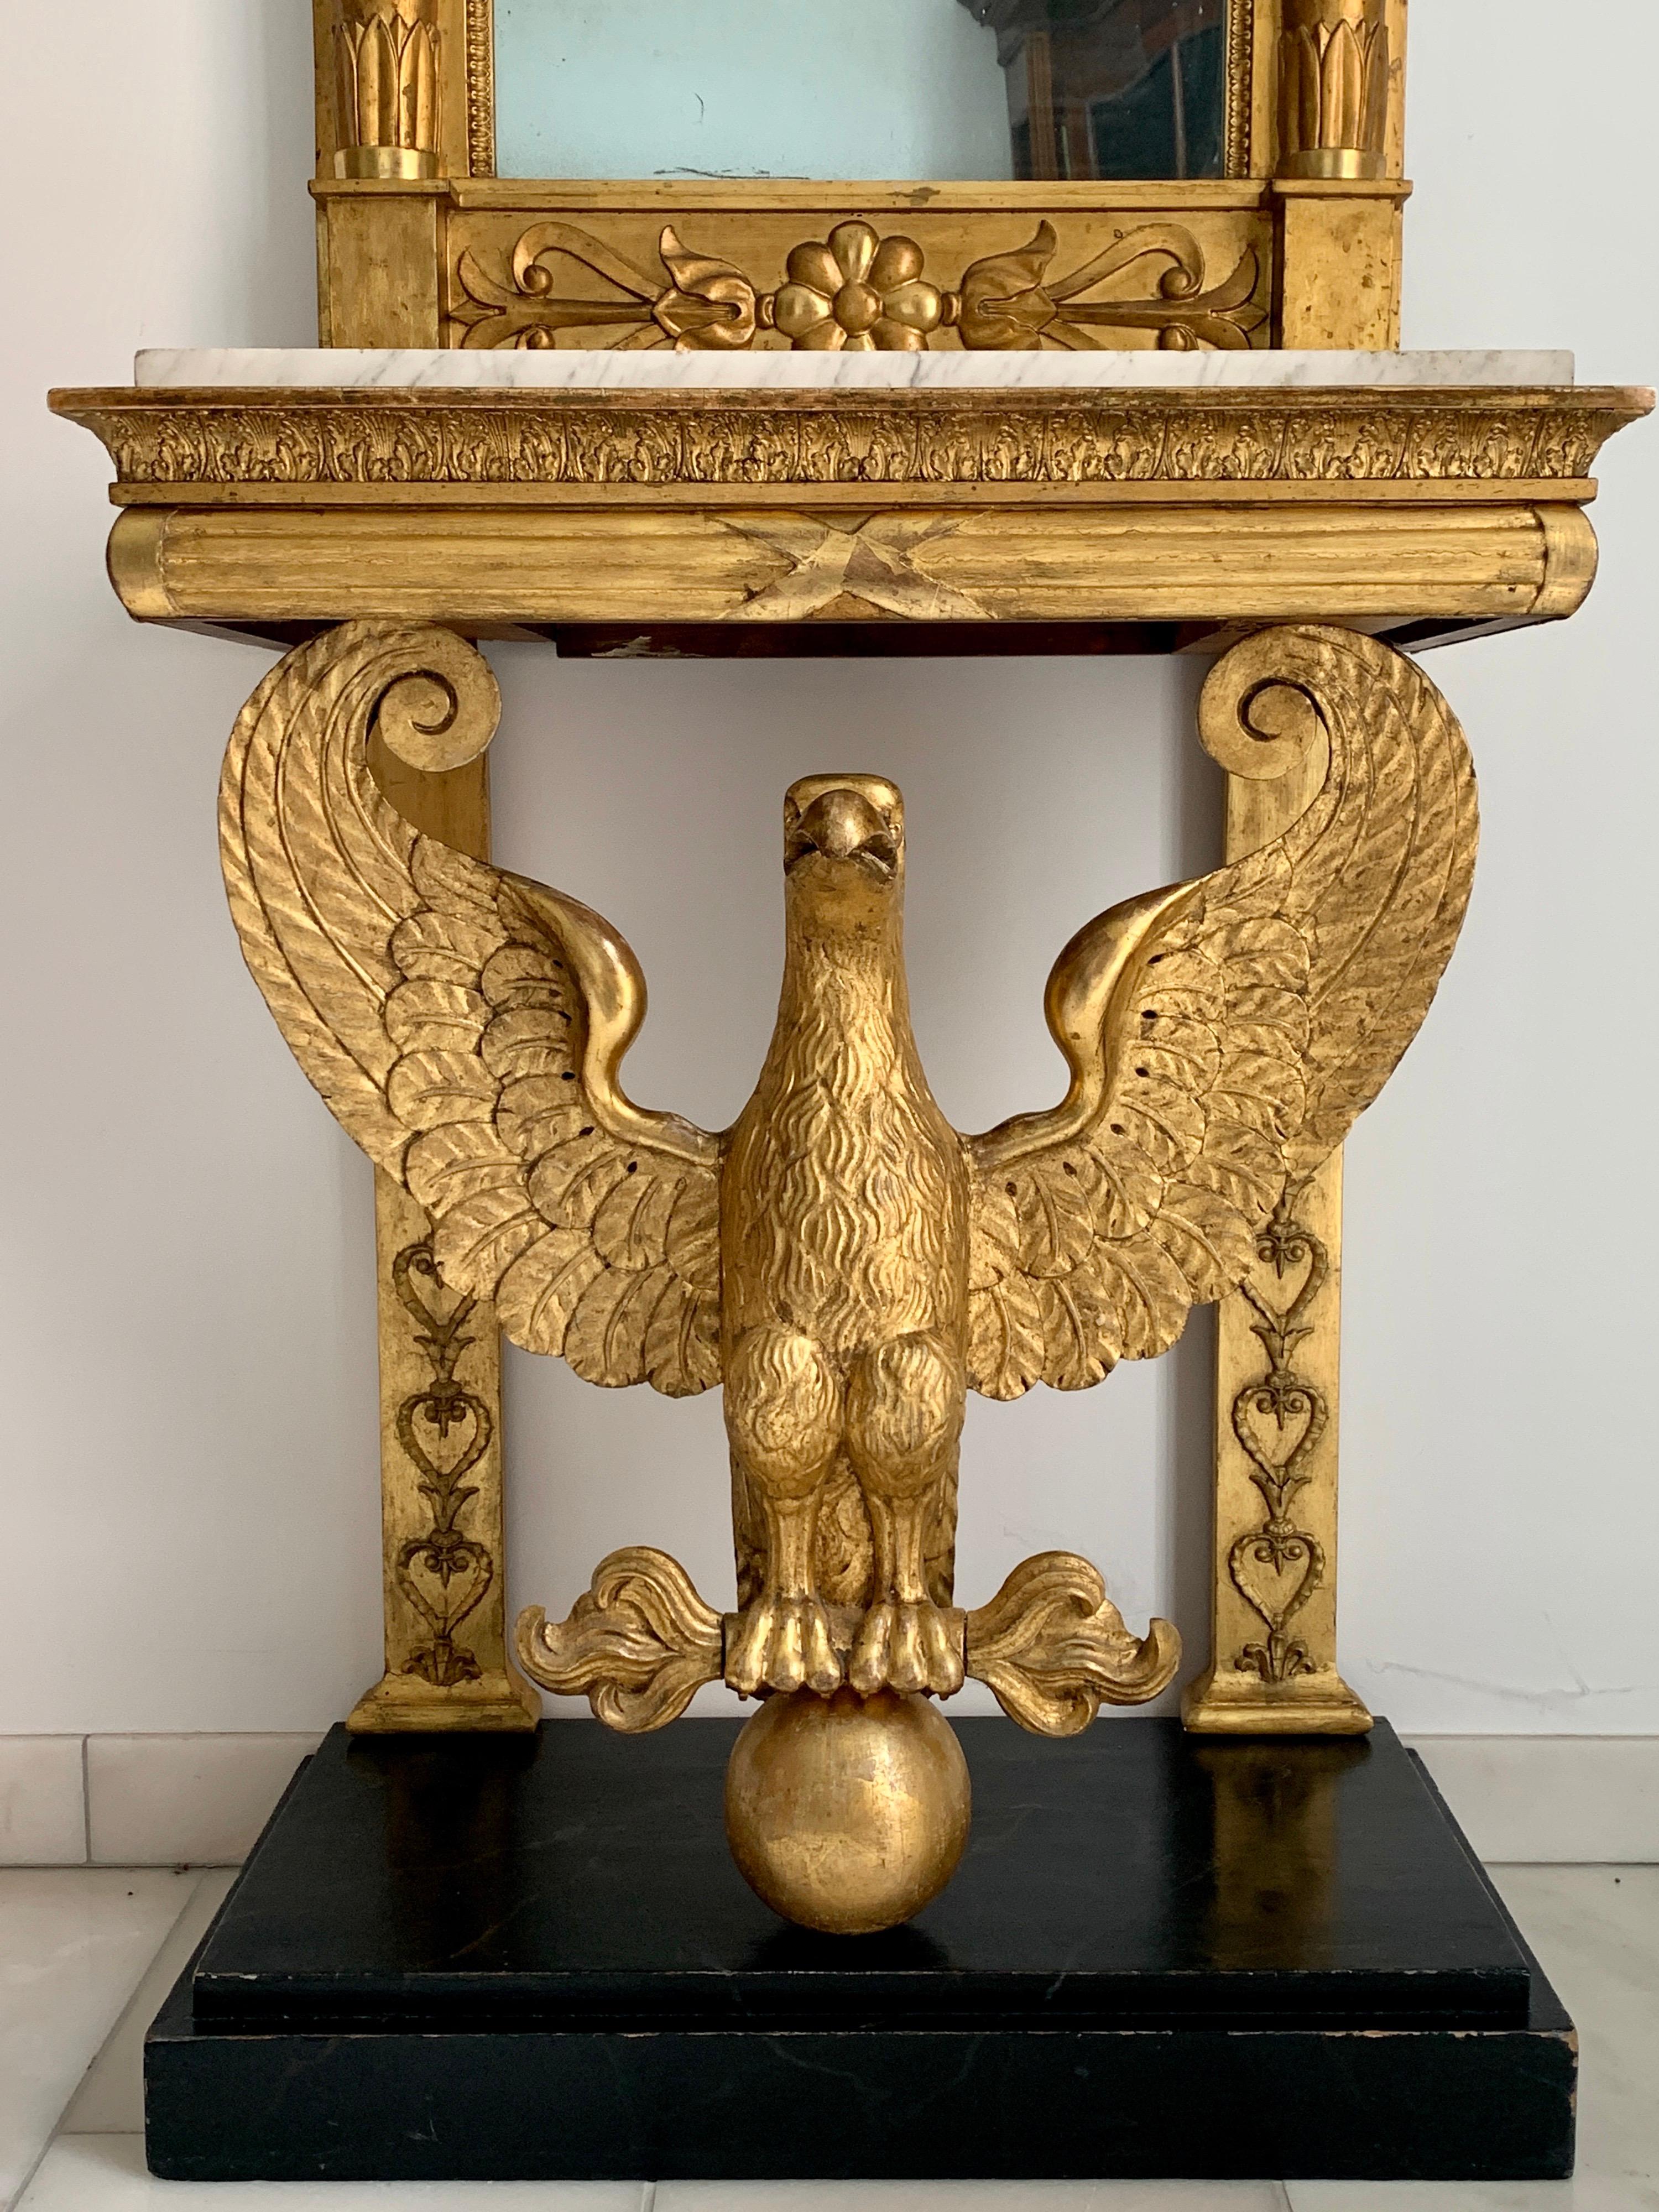 Very attractive early 19th century giltwood console table with a fully carved eagle supporting the white marble top. A matching mirror with late Empire decoration. Authentic condition, original marble, mirror plate in two parts.